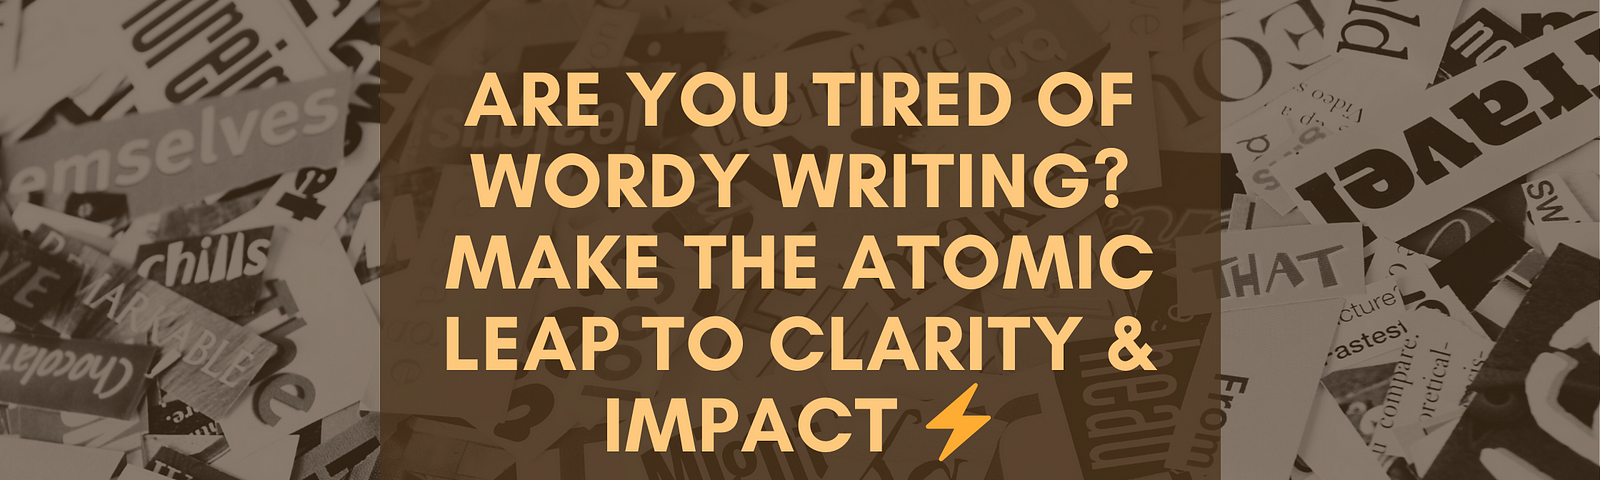 Are You Tired of Wordy Writing? Make the Atomic Leap to Clarity & Impact ⚡